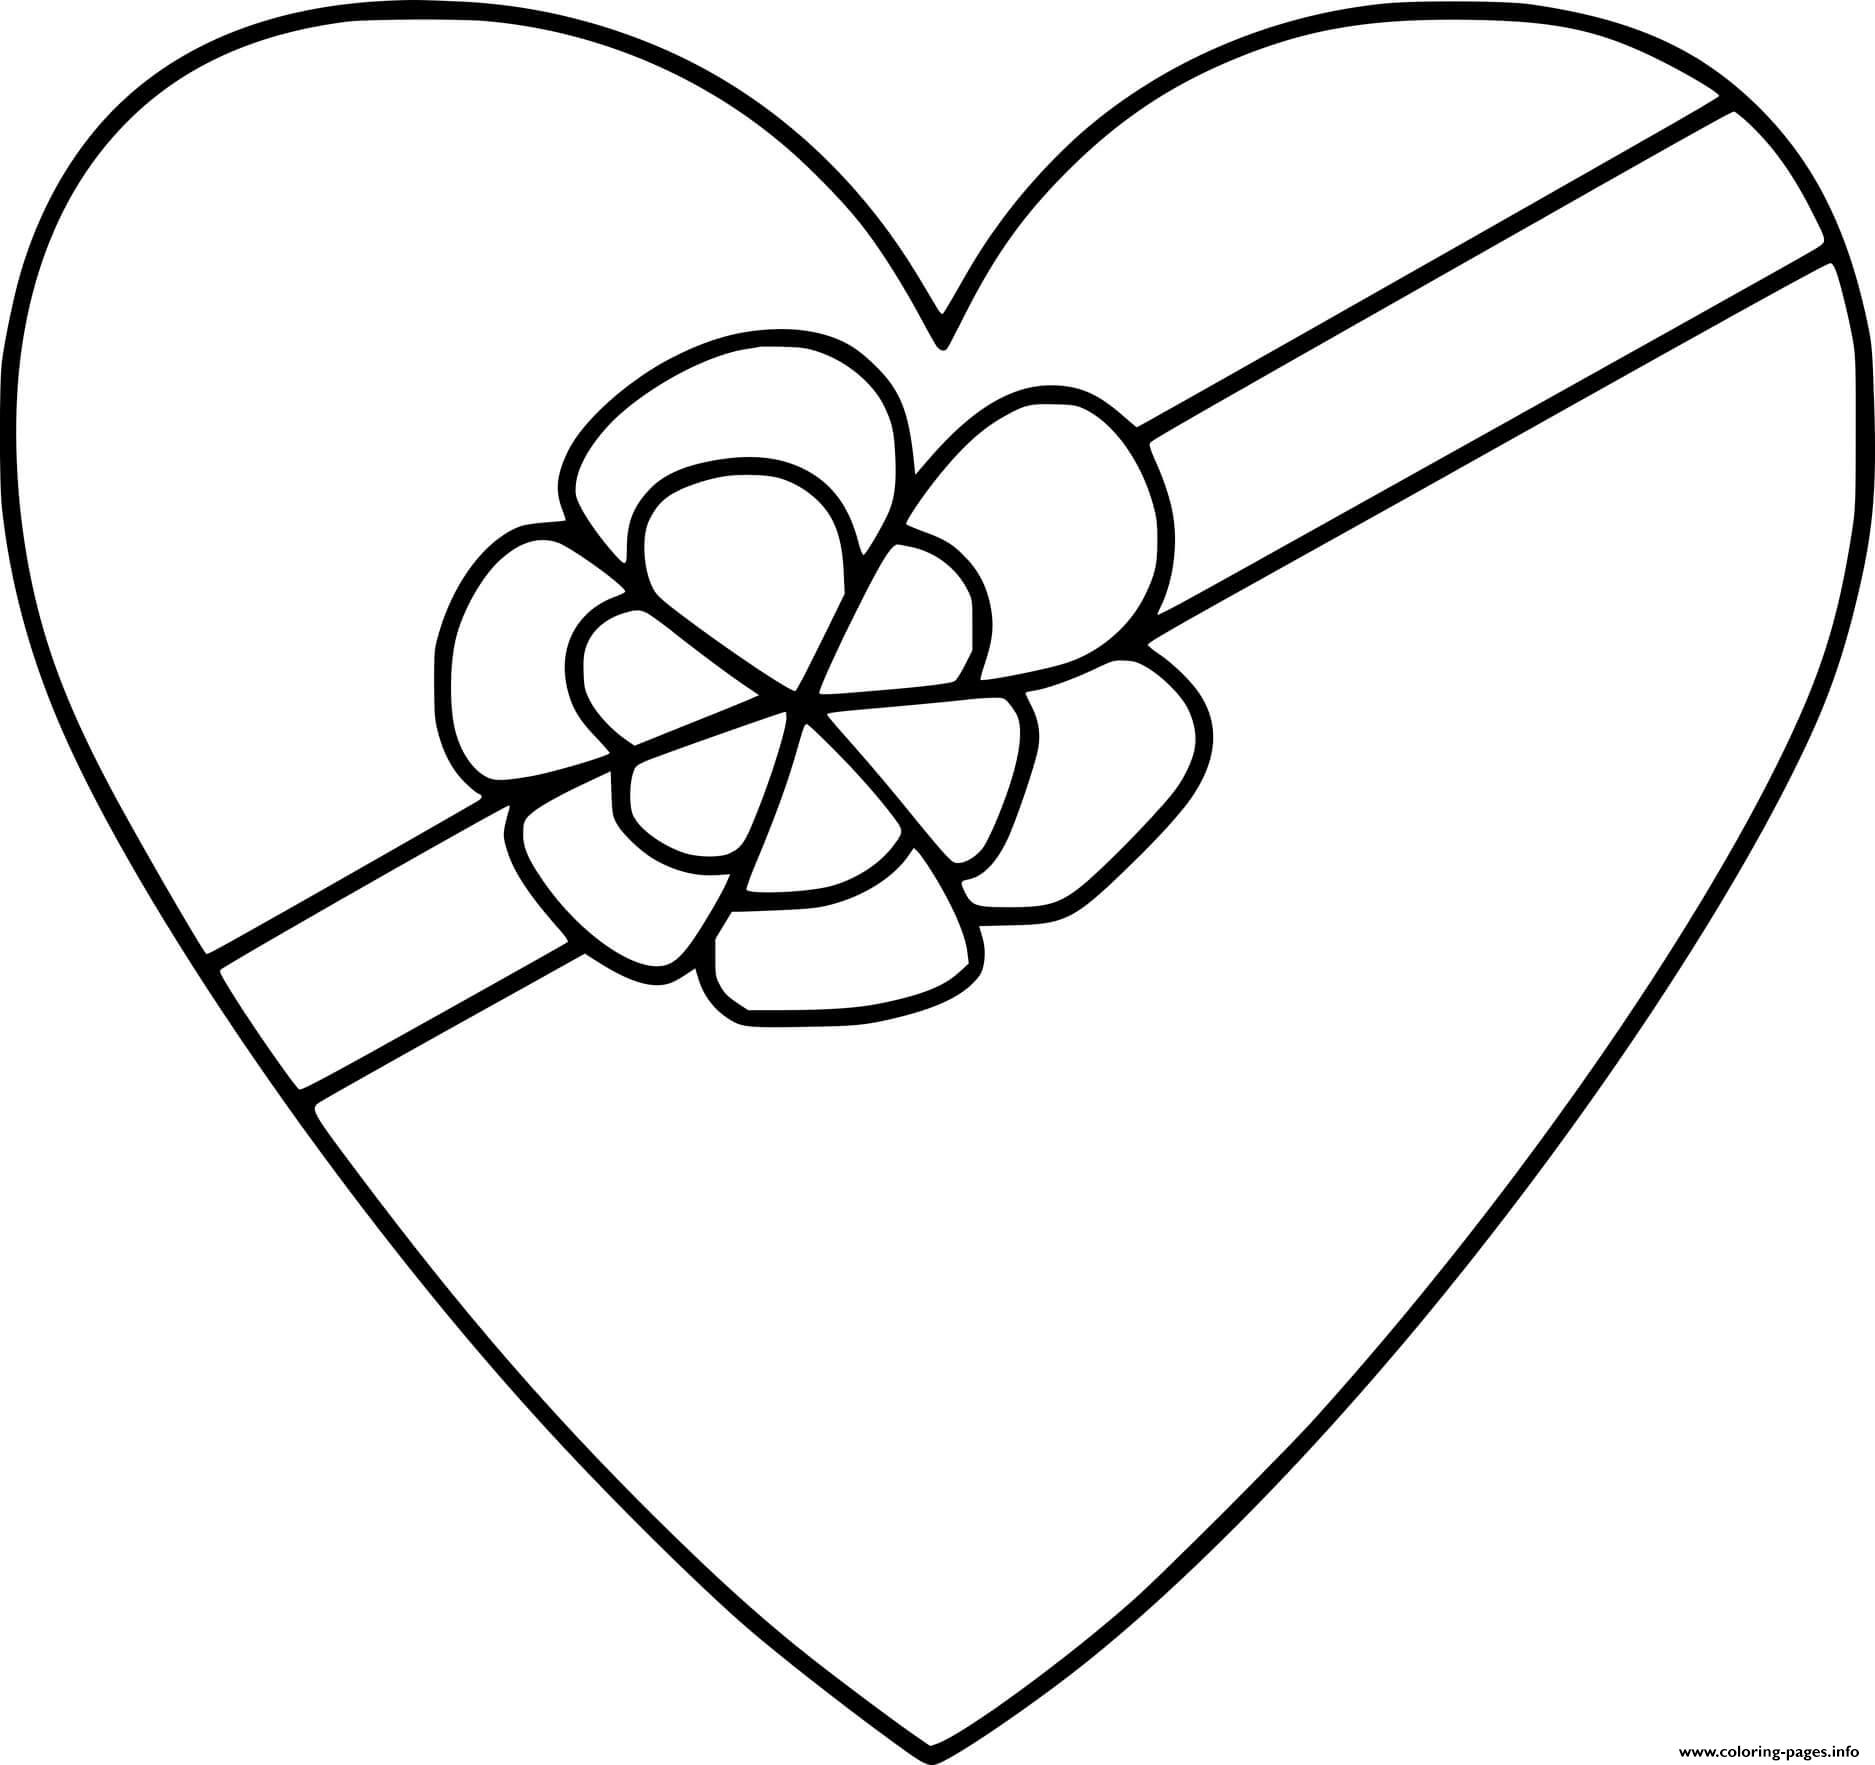 Heart With A Flower coloring